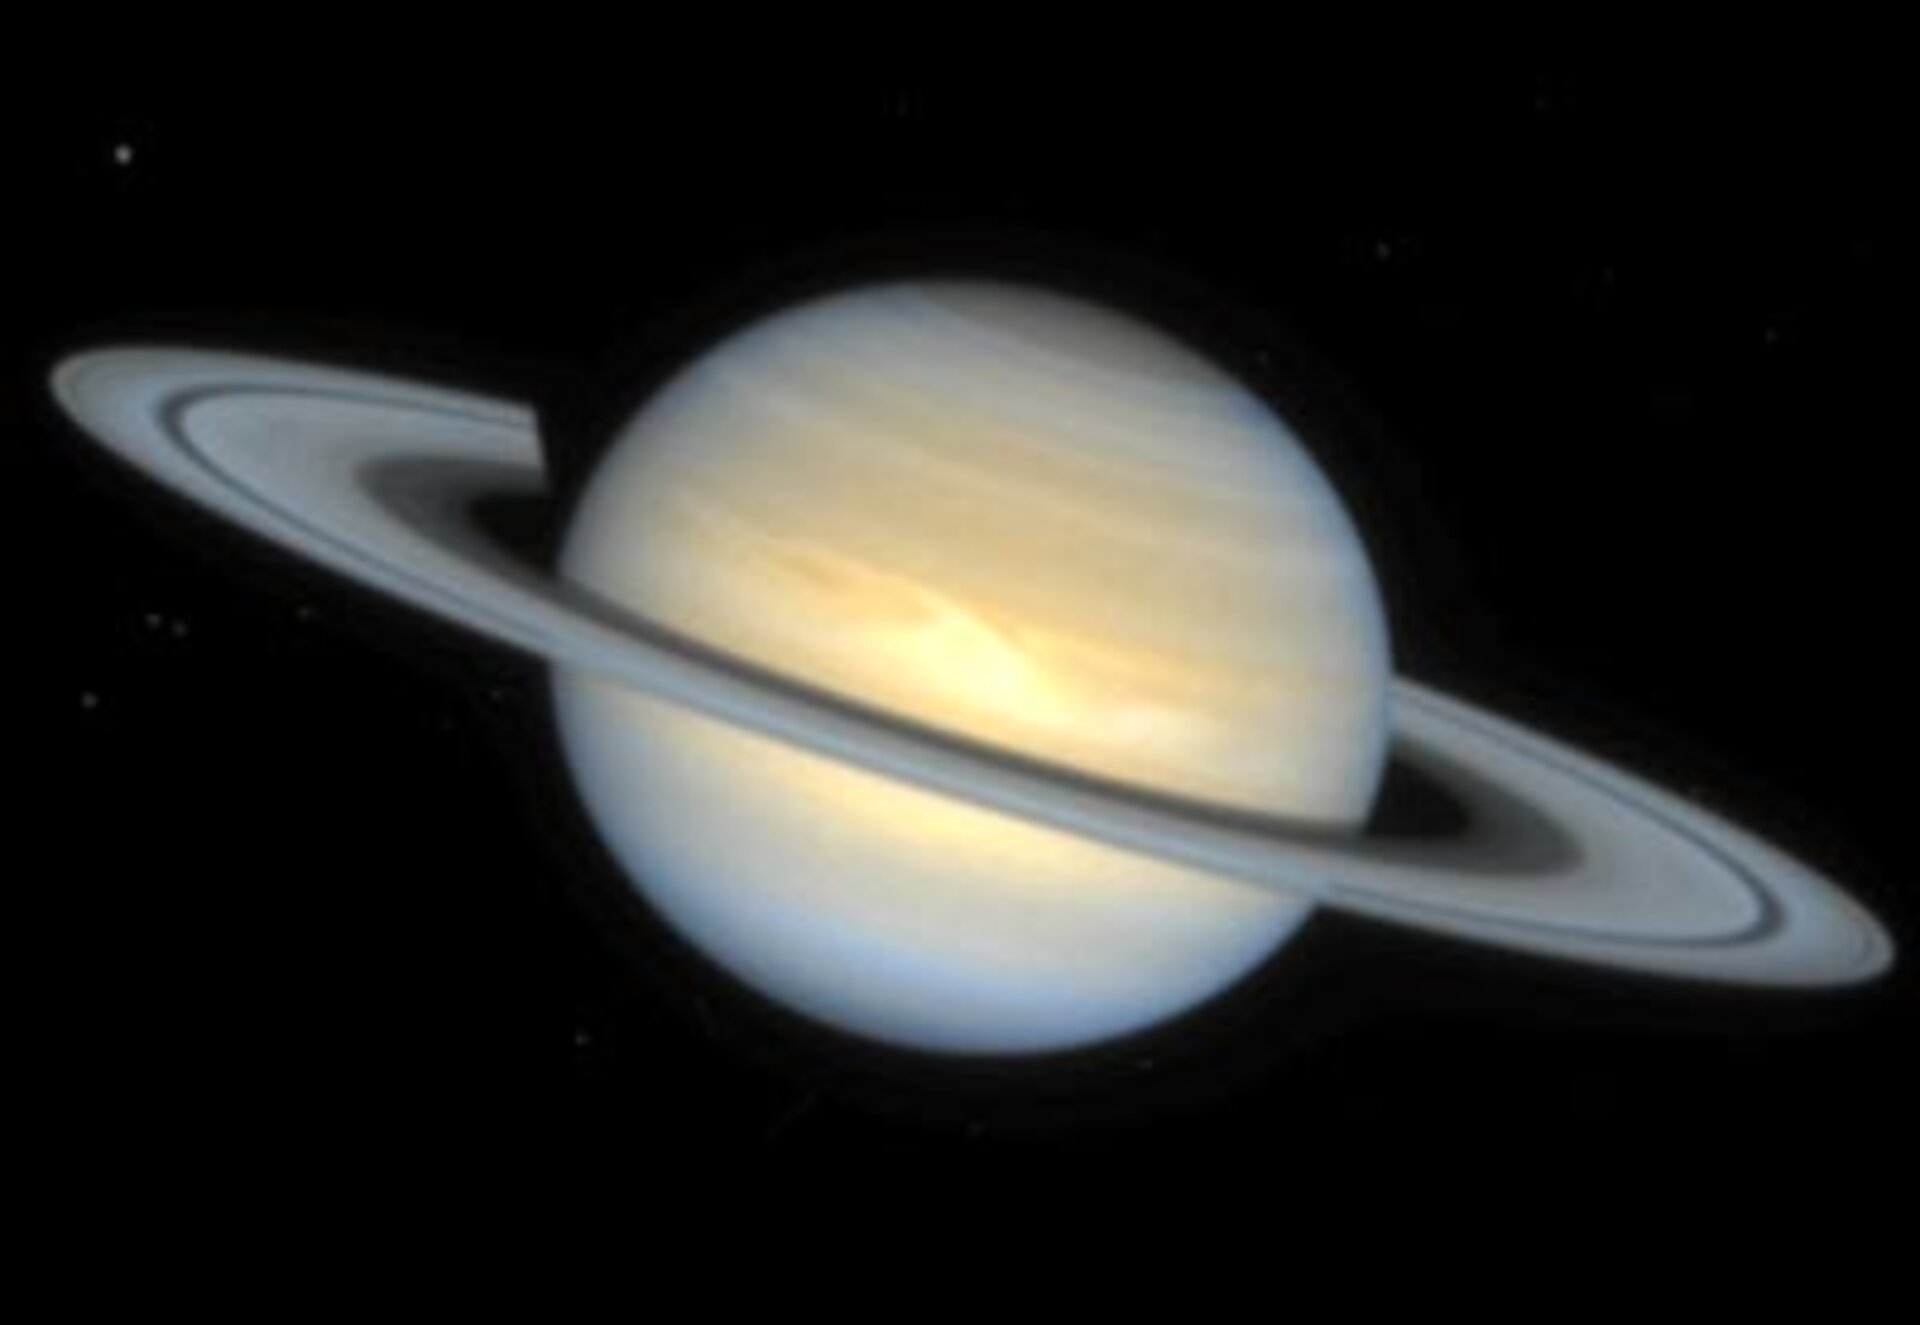 NASA Hubble Space Telescope image of the ringed planet Saturn